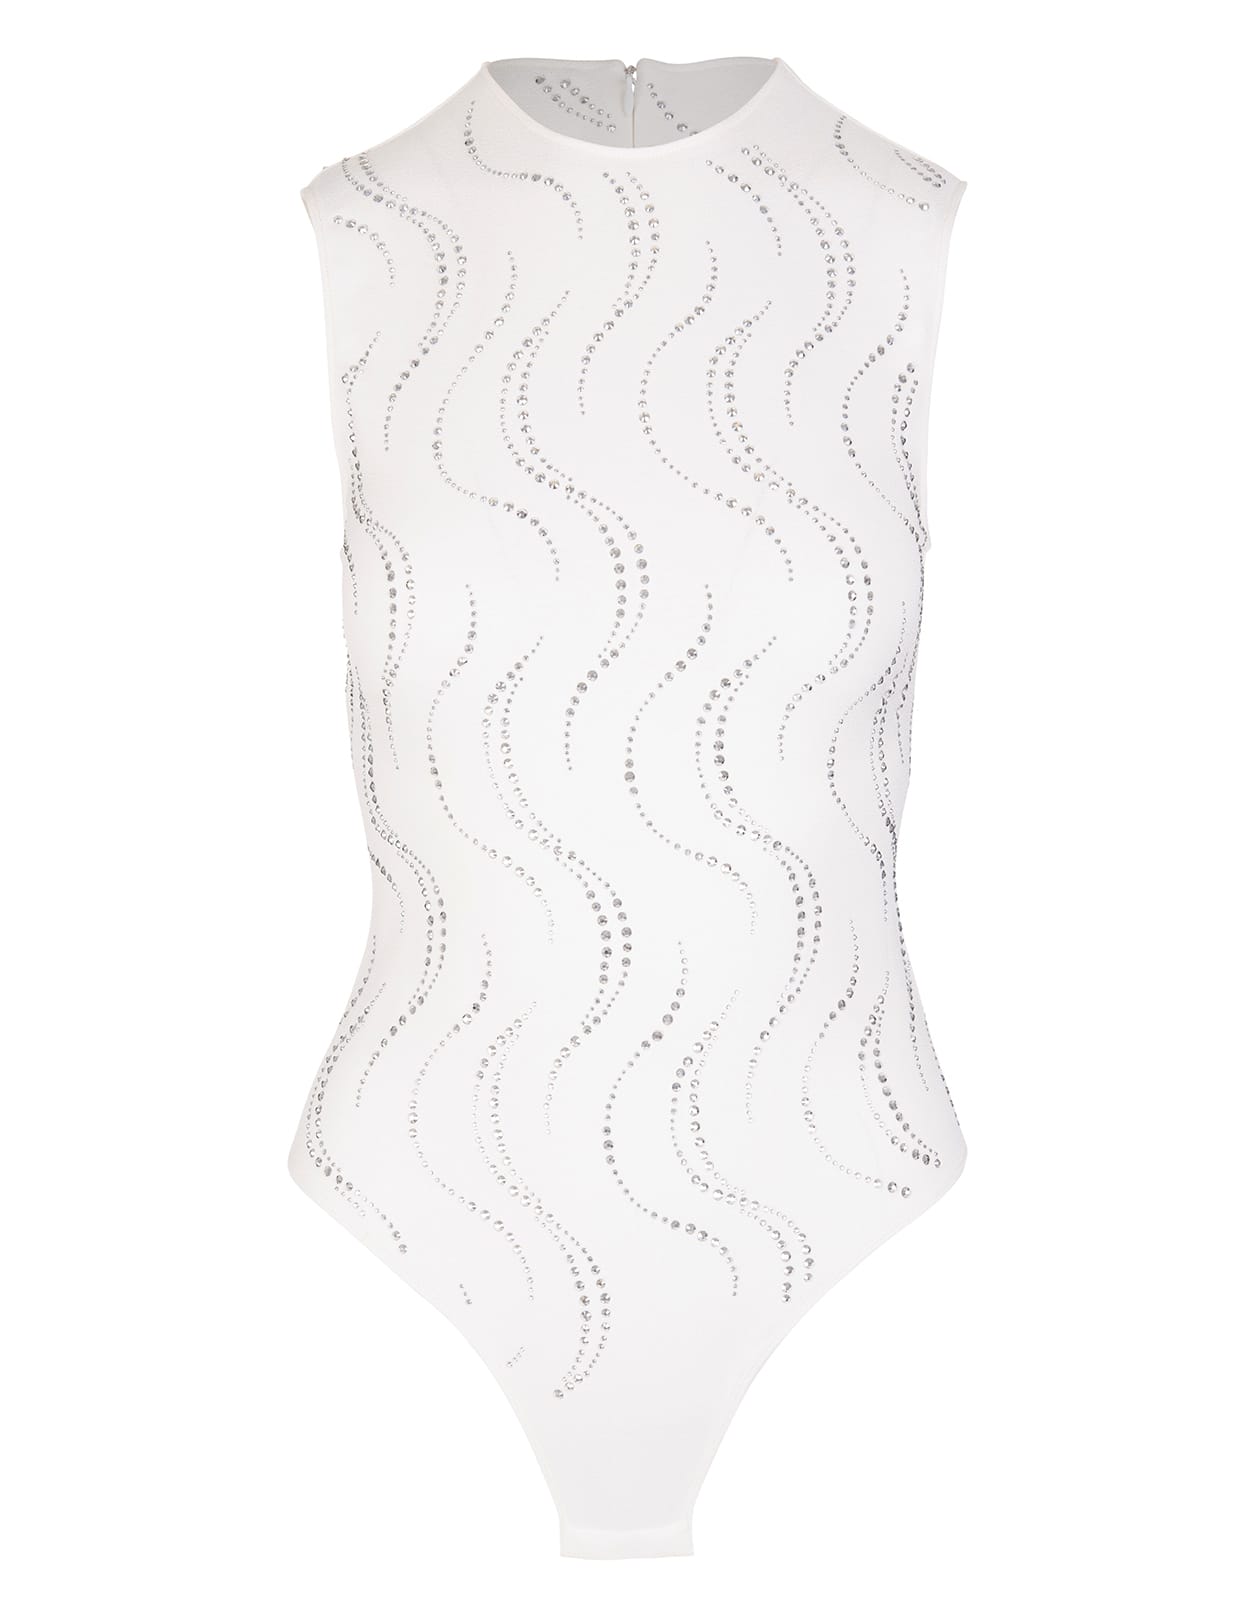 Stella McCartney Woman Cream Body Top With All-over Waves Pattern